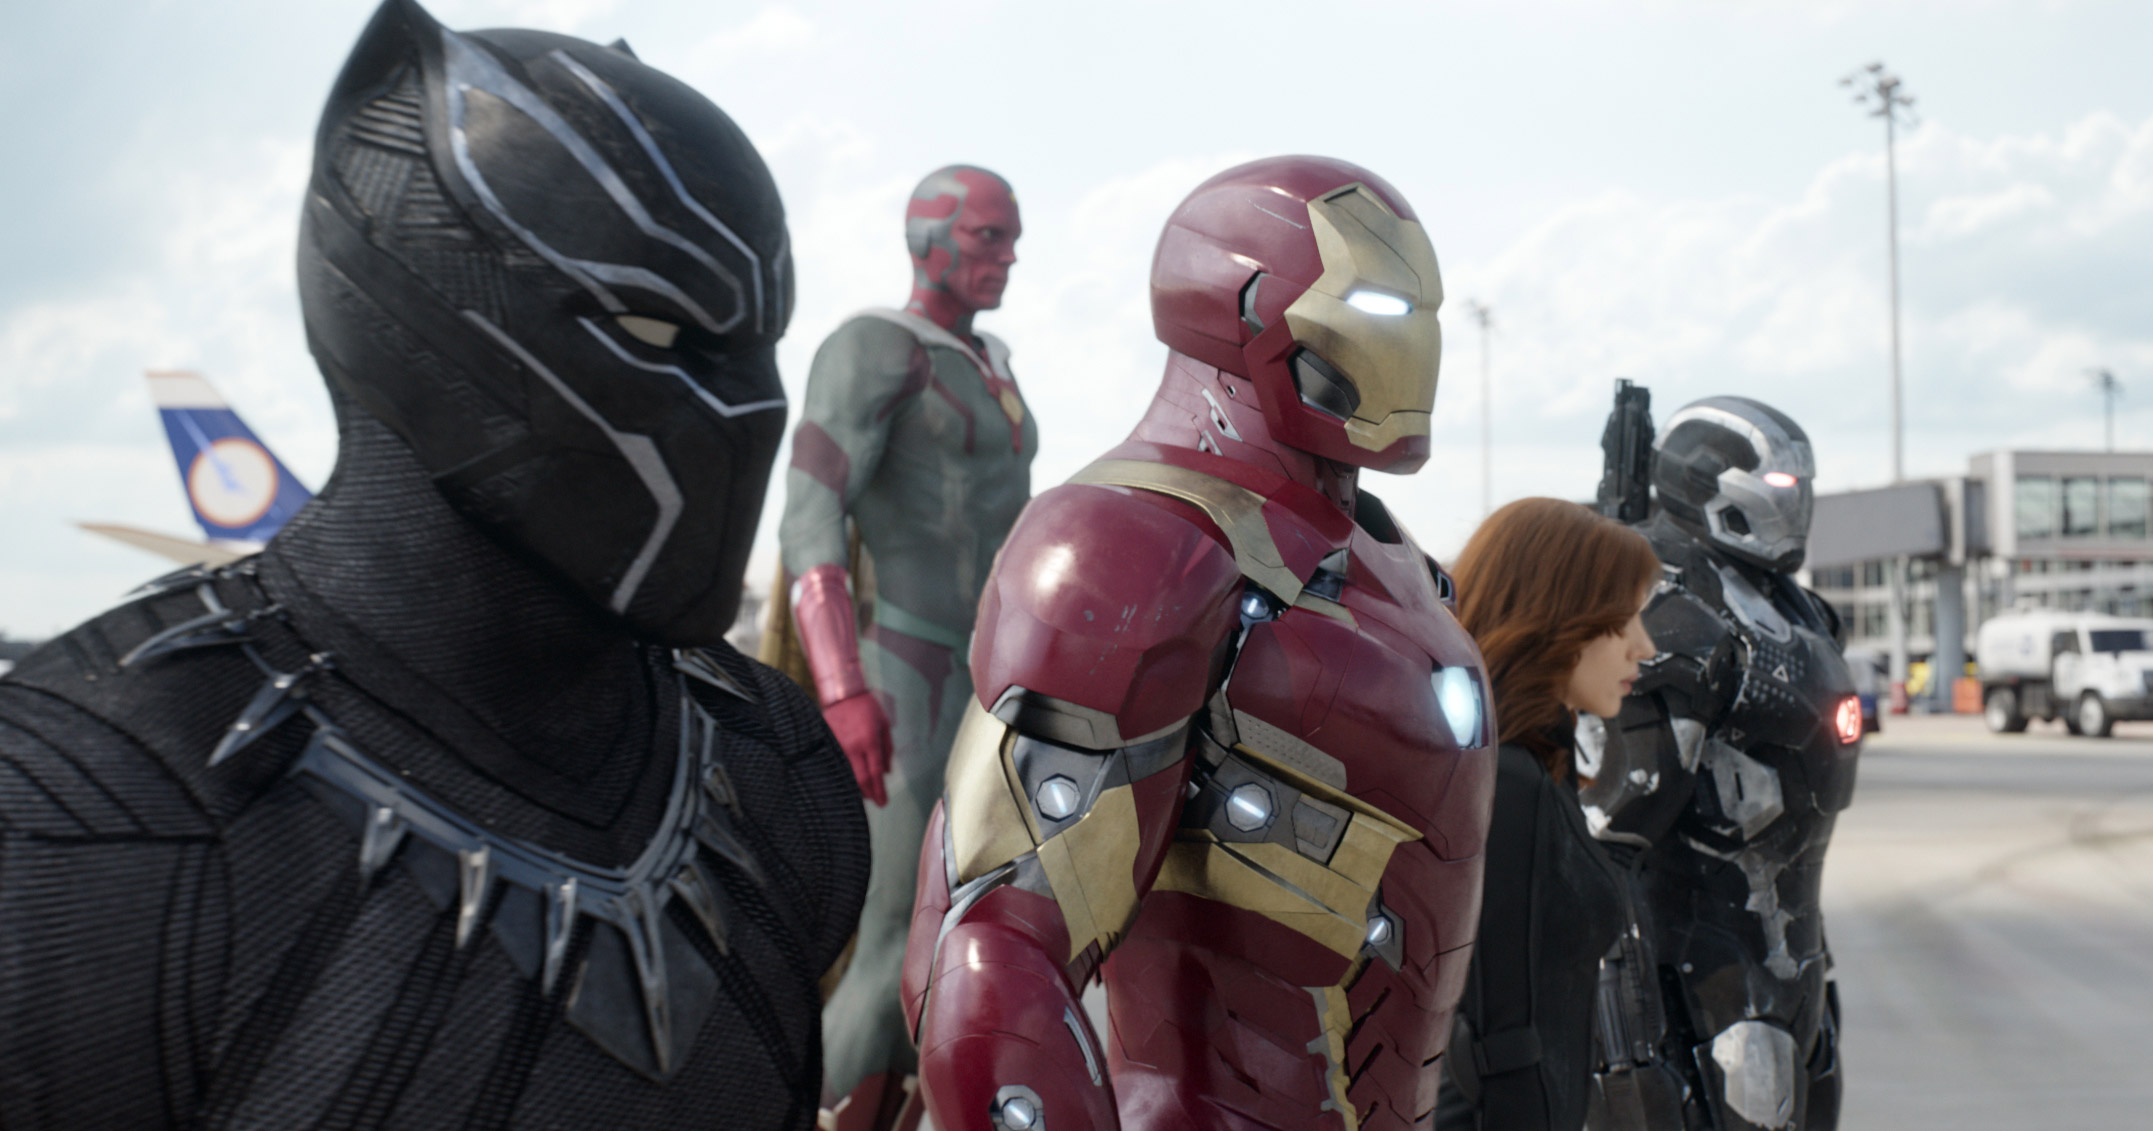 Chadwick Boseman, from left, as Panther, Paul Bettany as Vision, Robert Downey Jr. as Iron Man, Scarlett Johansson as Natasha Romanoff, and Don Cheadle as War Machine in a scene from "Marvel's Captain America: Civil War." (Disney Marvel/AP)